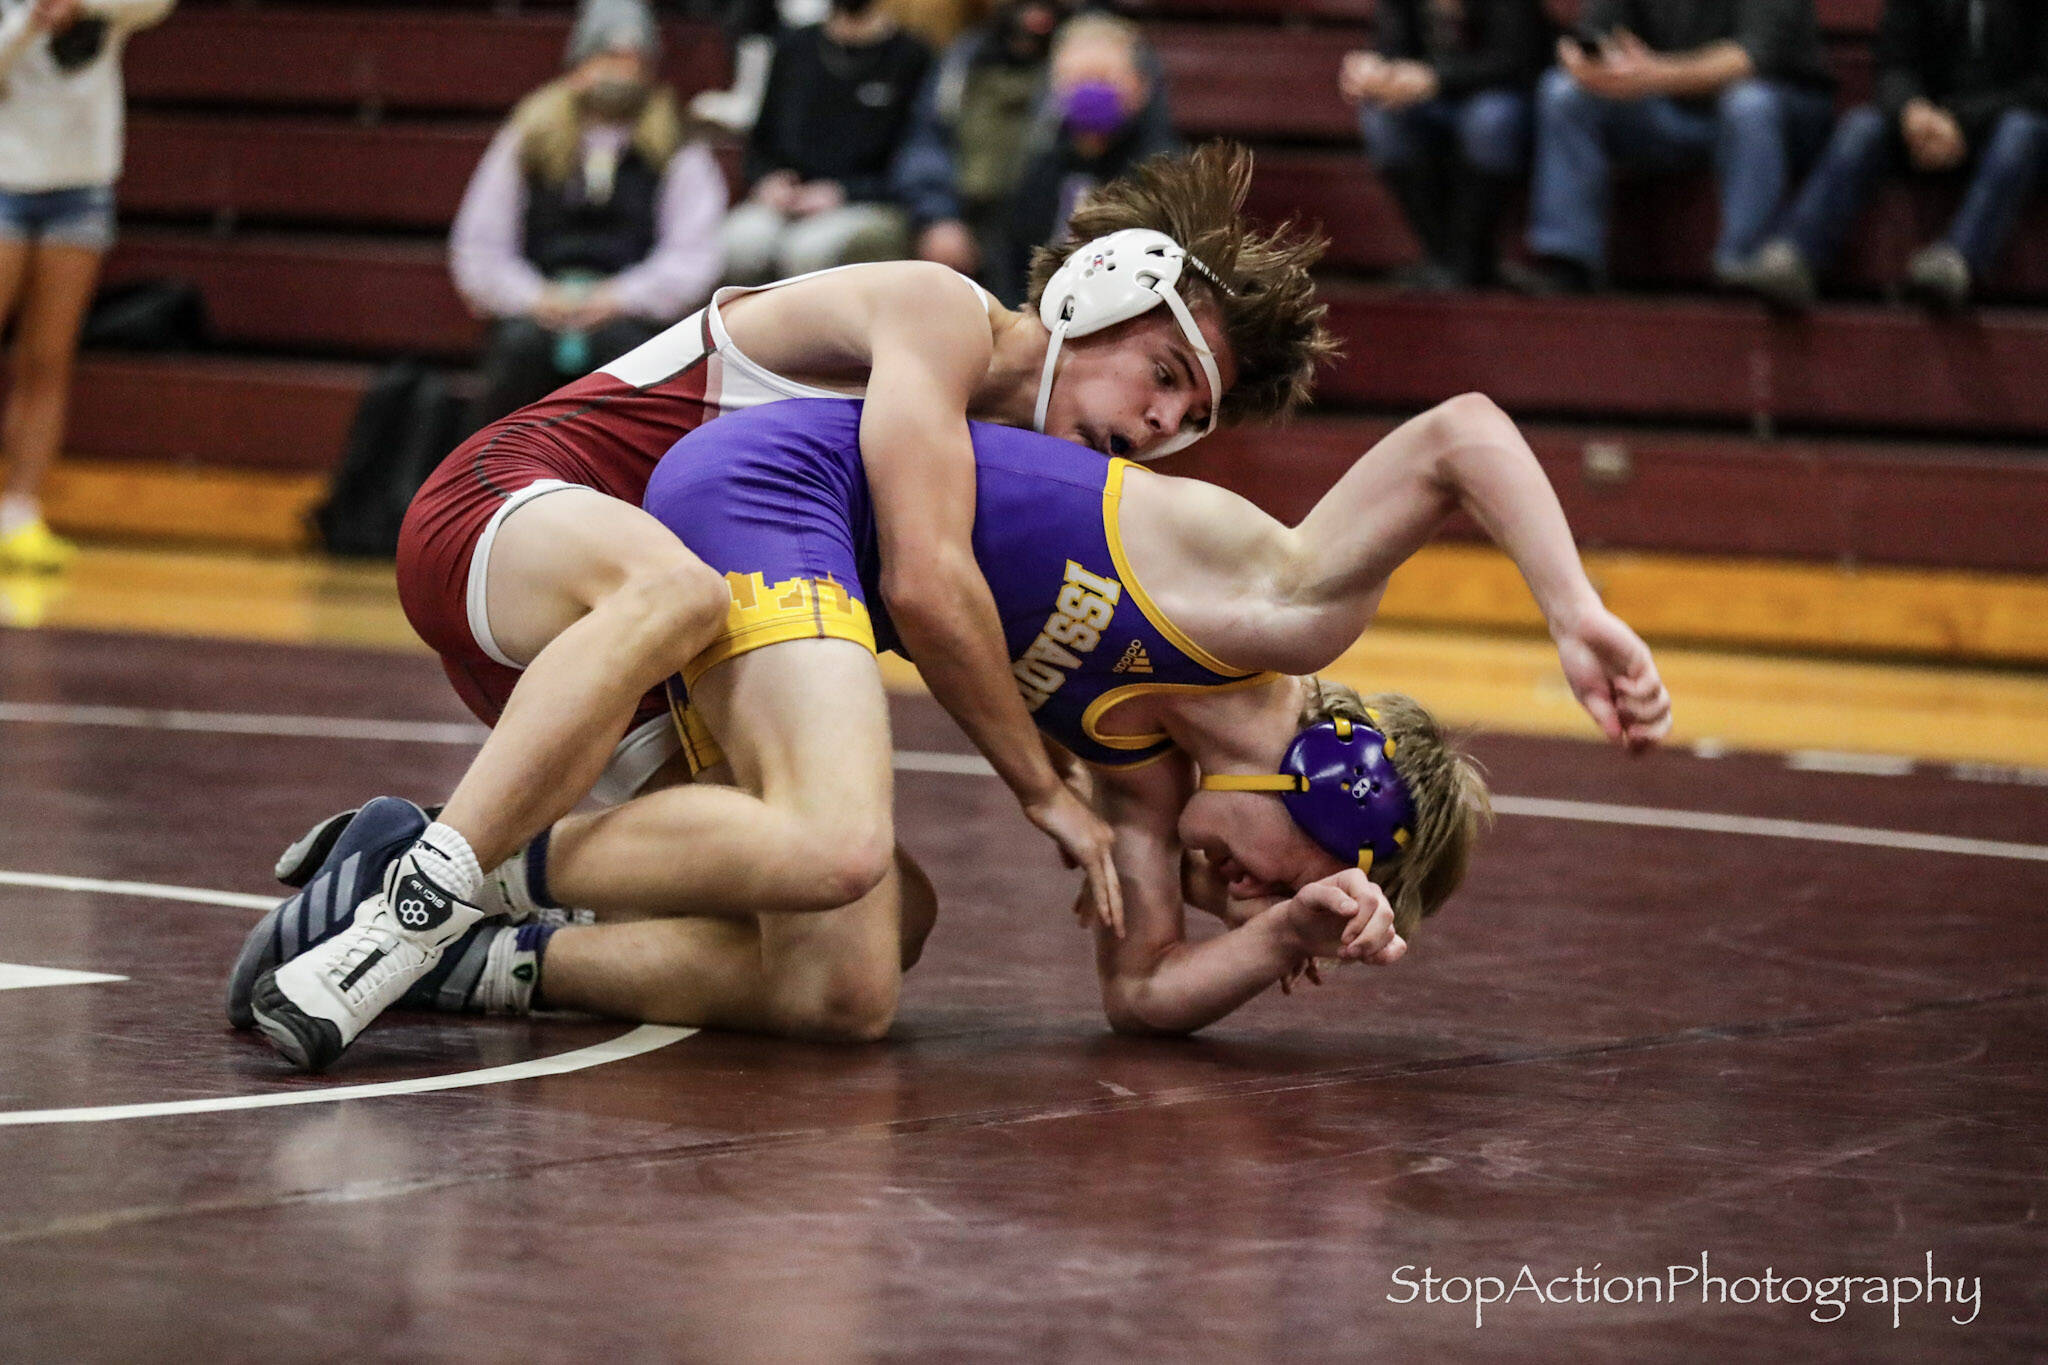 Mercer Island’s Maxwell Martin, top, gets a hold on Issaquah’s Quin Seiffert during a 138-pound match on Jan. 6. Martin defeated Seiffert by minor decision, 7-1. Mercer Island topped Issaquah, 32-27, and Mount Si beat Mercer Island, 42-37, in the double-dual. Other Mercer Island winners on the night were Gordon Gibson (120), Lincoln Woods (126), Chase Warnick (145), Clark Koopman (152), Jack Levitt (170), Leo Garry (106) and Magnus Dorre (113). Photo courtesy of Don Borin/StopActionPhotography